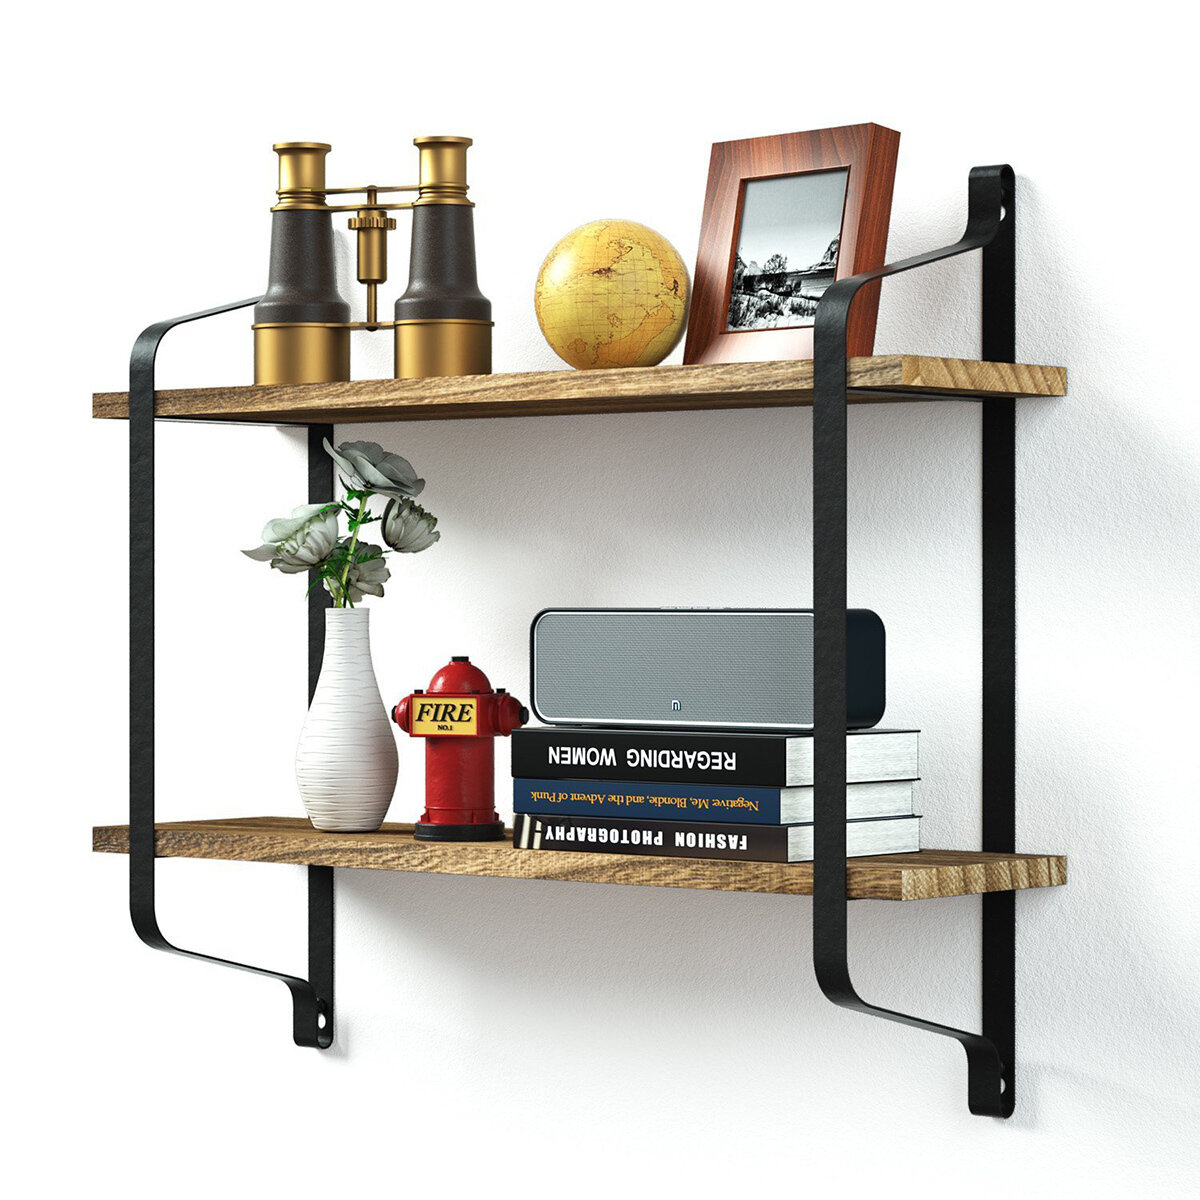 2 Tiers Wall Mounted Storage Rack Wall Hanging Wood Shelves Holder Organizer Bookshelf Display Stand Home Office Decor COD